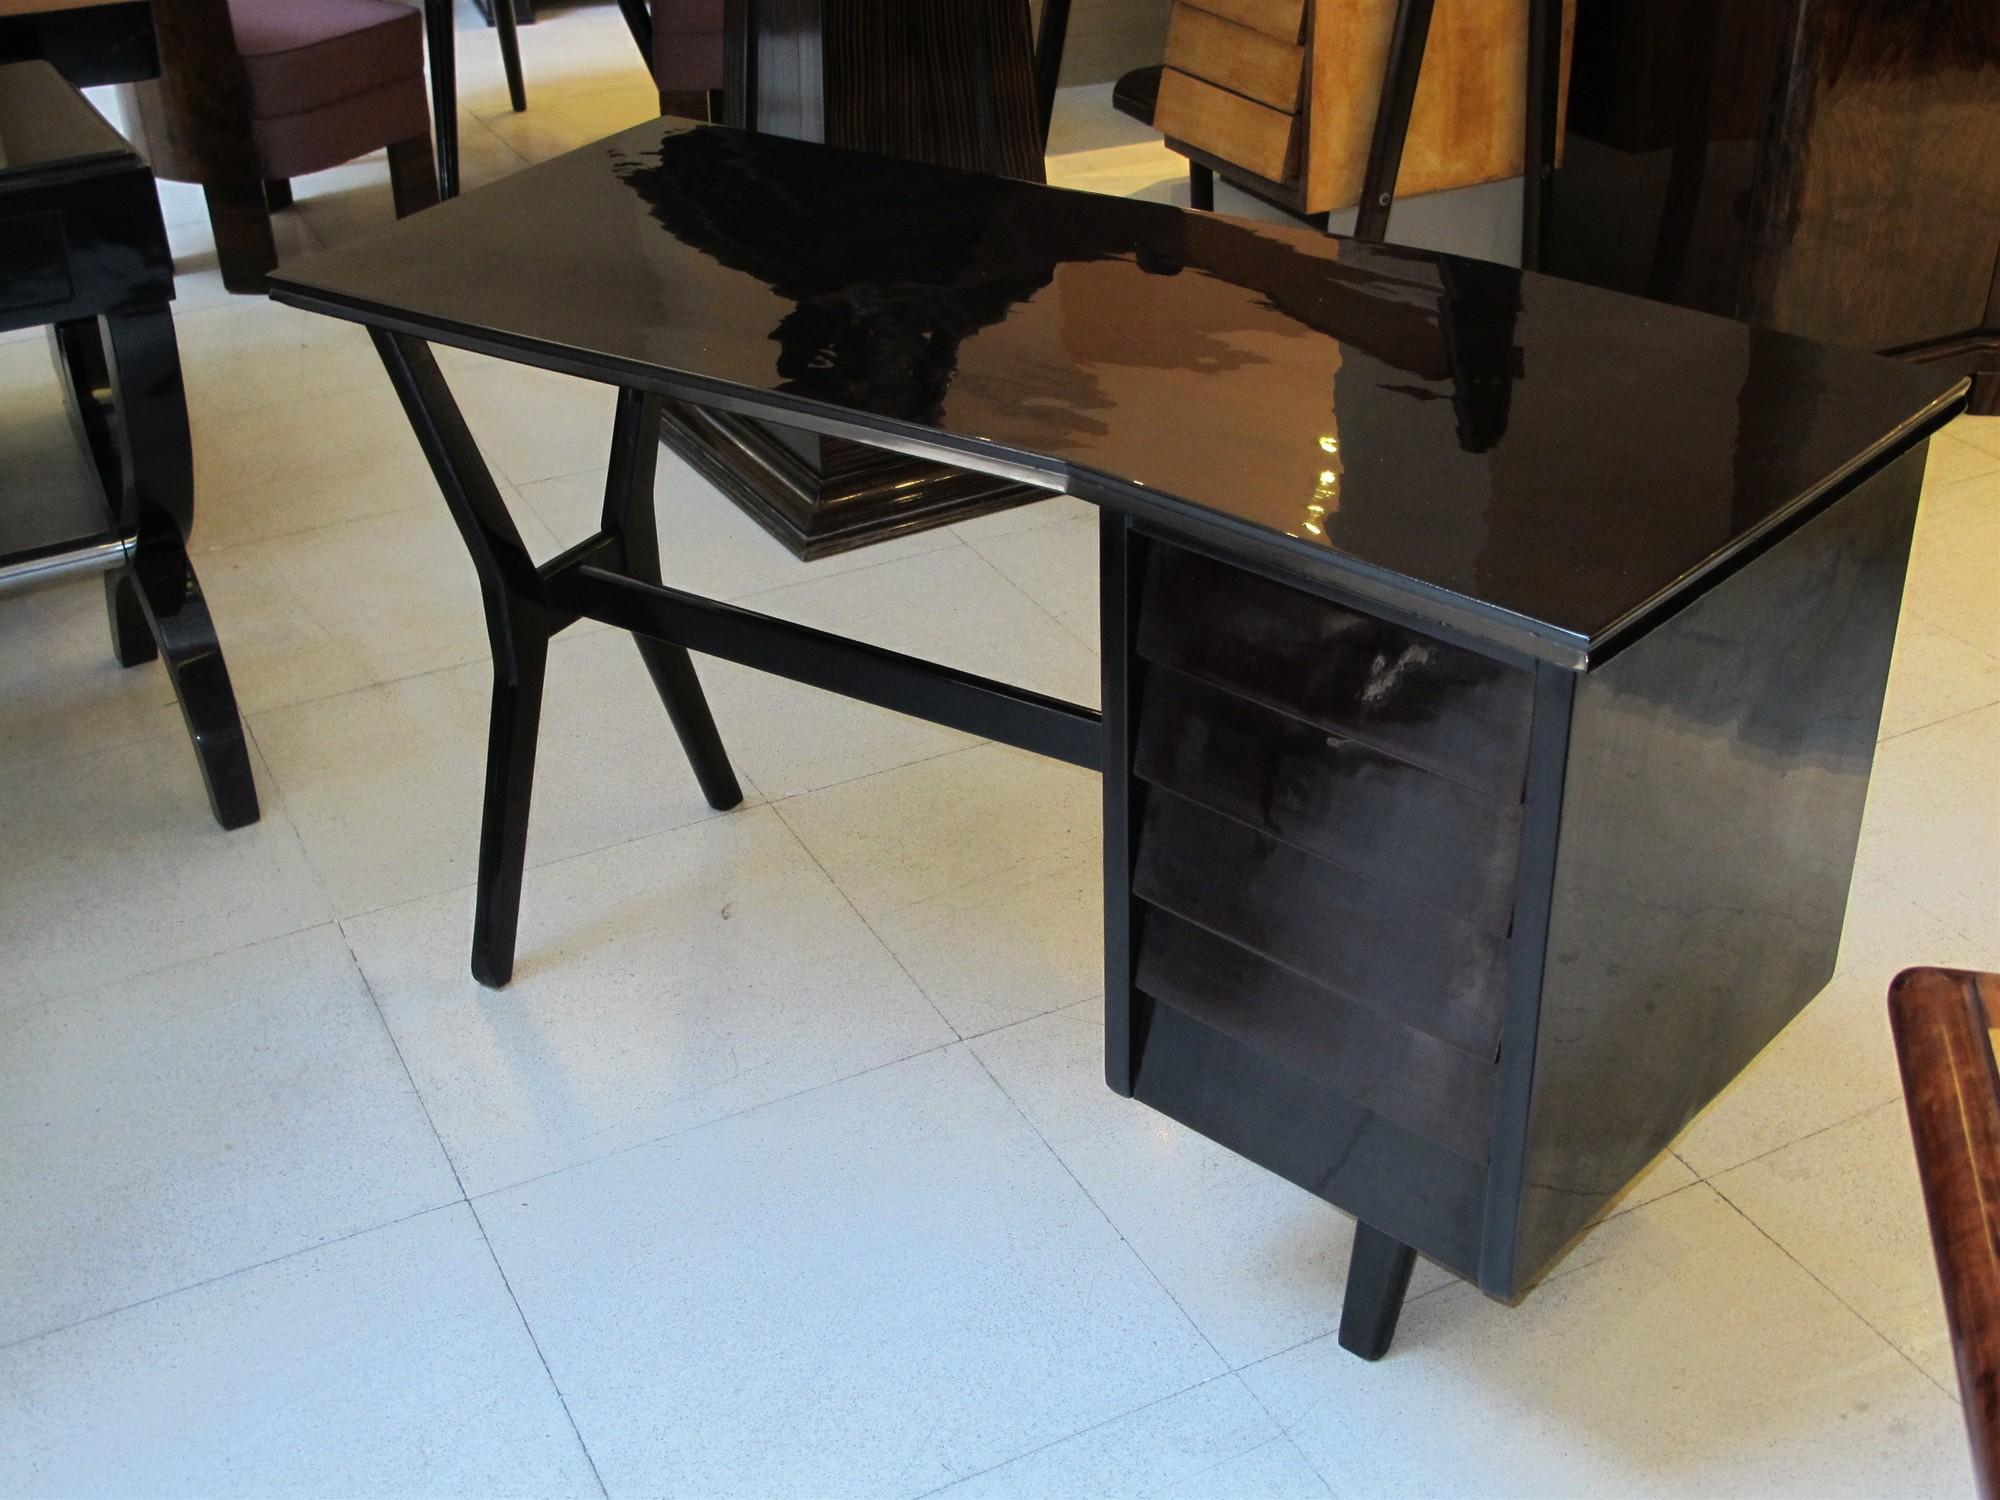 Wood desk from the 50s, Italian.

Desk 1950s 
Country: Italian
Finish: polyurethanic lacquer
It is an elegant and sophisticated desk.
If you have any questions we are at your disposal.
We have specialized in the sale of Art Deco and Art Nouveau and